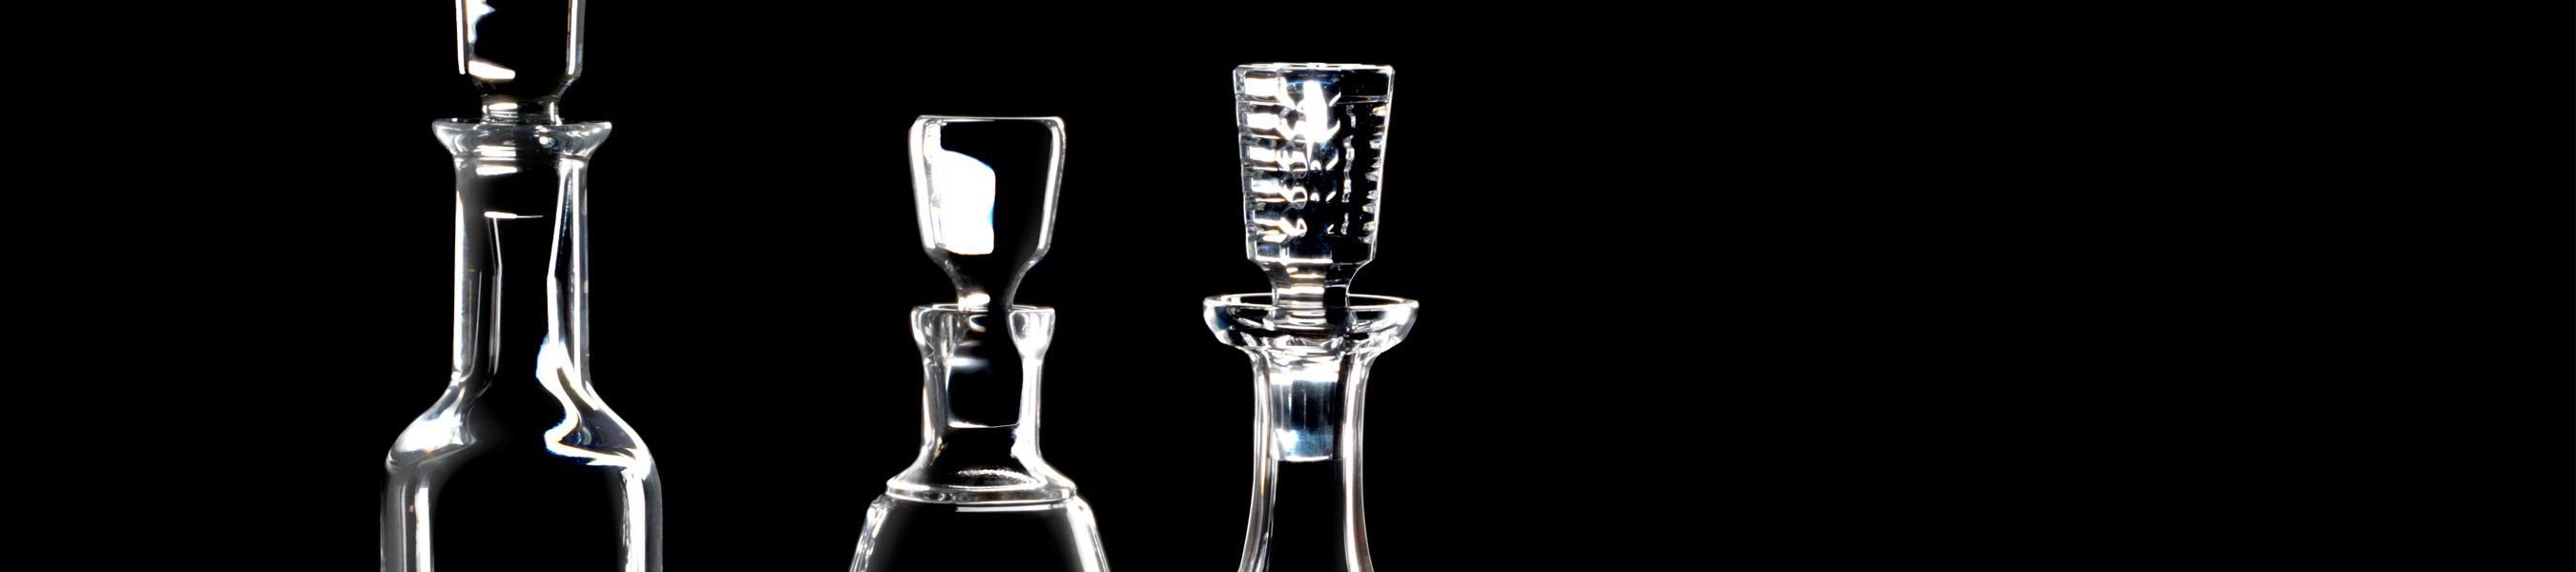 28 Lovable Mikasa atlantic Crystal Vase 2024 free download mikasa atlantic crystal vase of crystal decanters pitchers carafes waterforda us with waterford crystal decanters pitchers carafes